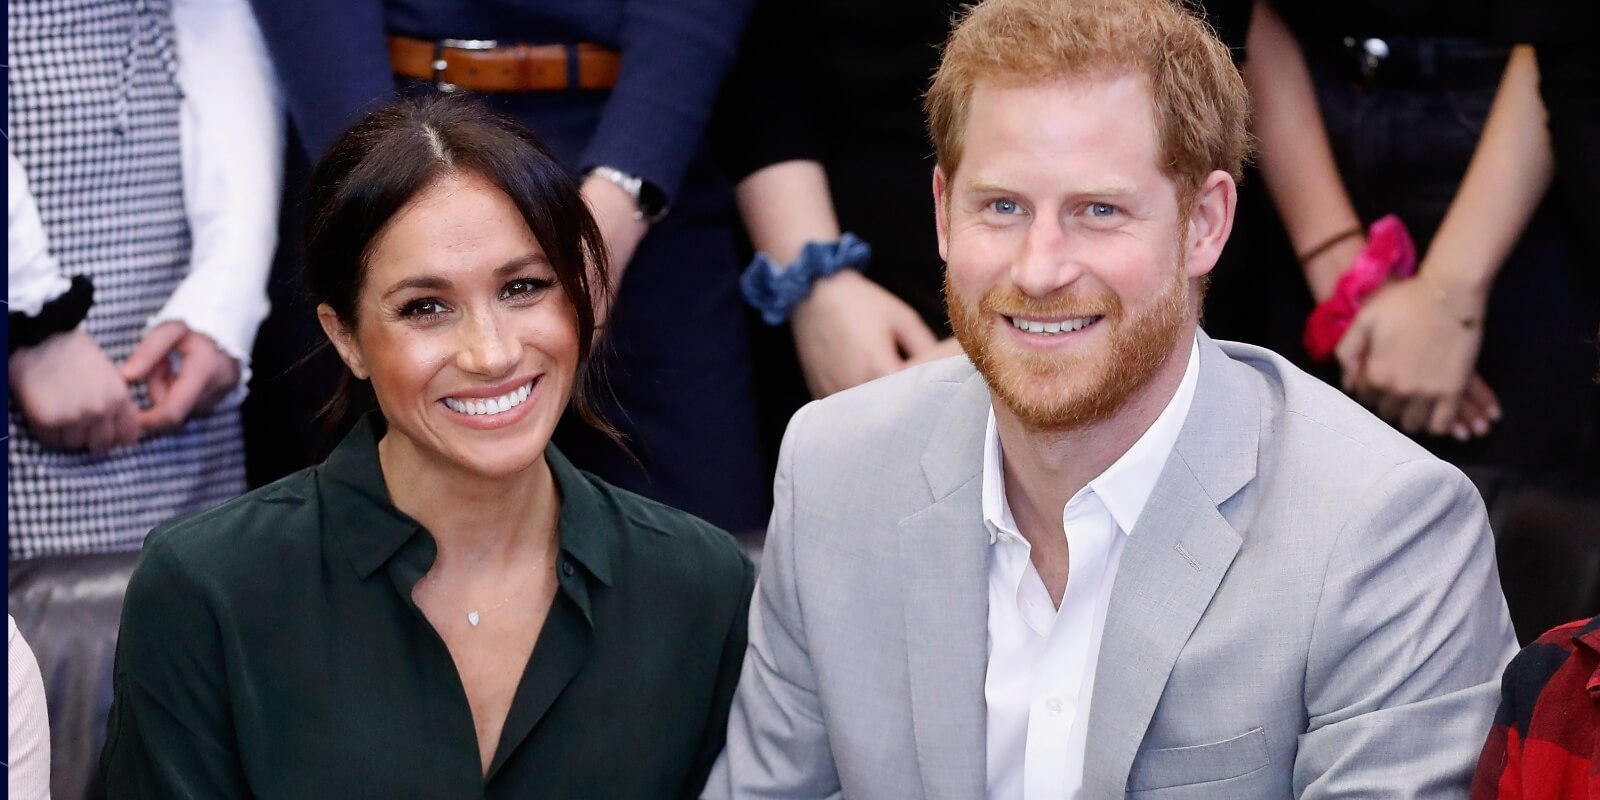 Meghan Markle and Prince Harry are reportedly 'cosplaying' their royal duties says a royal commentator.